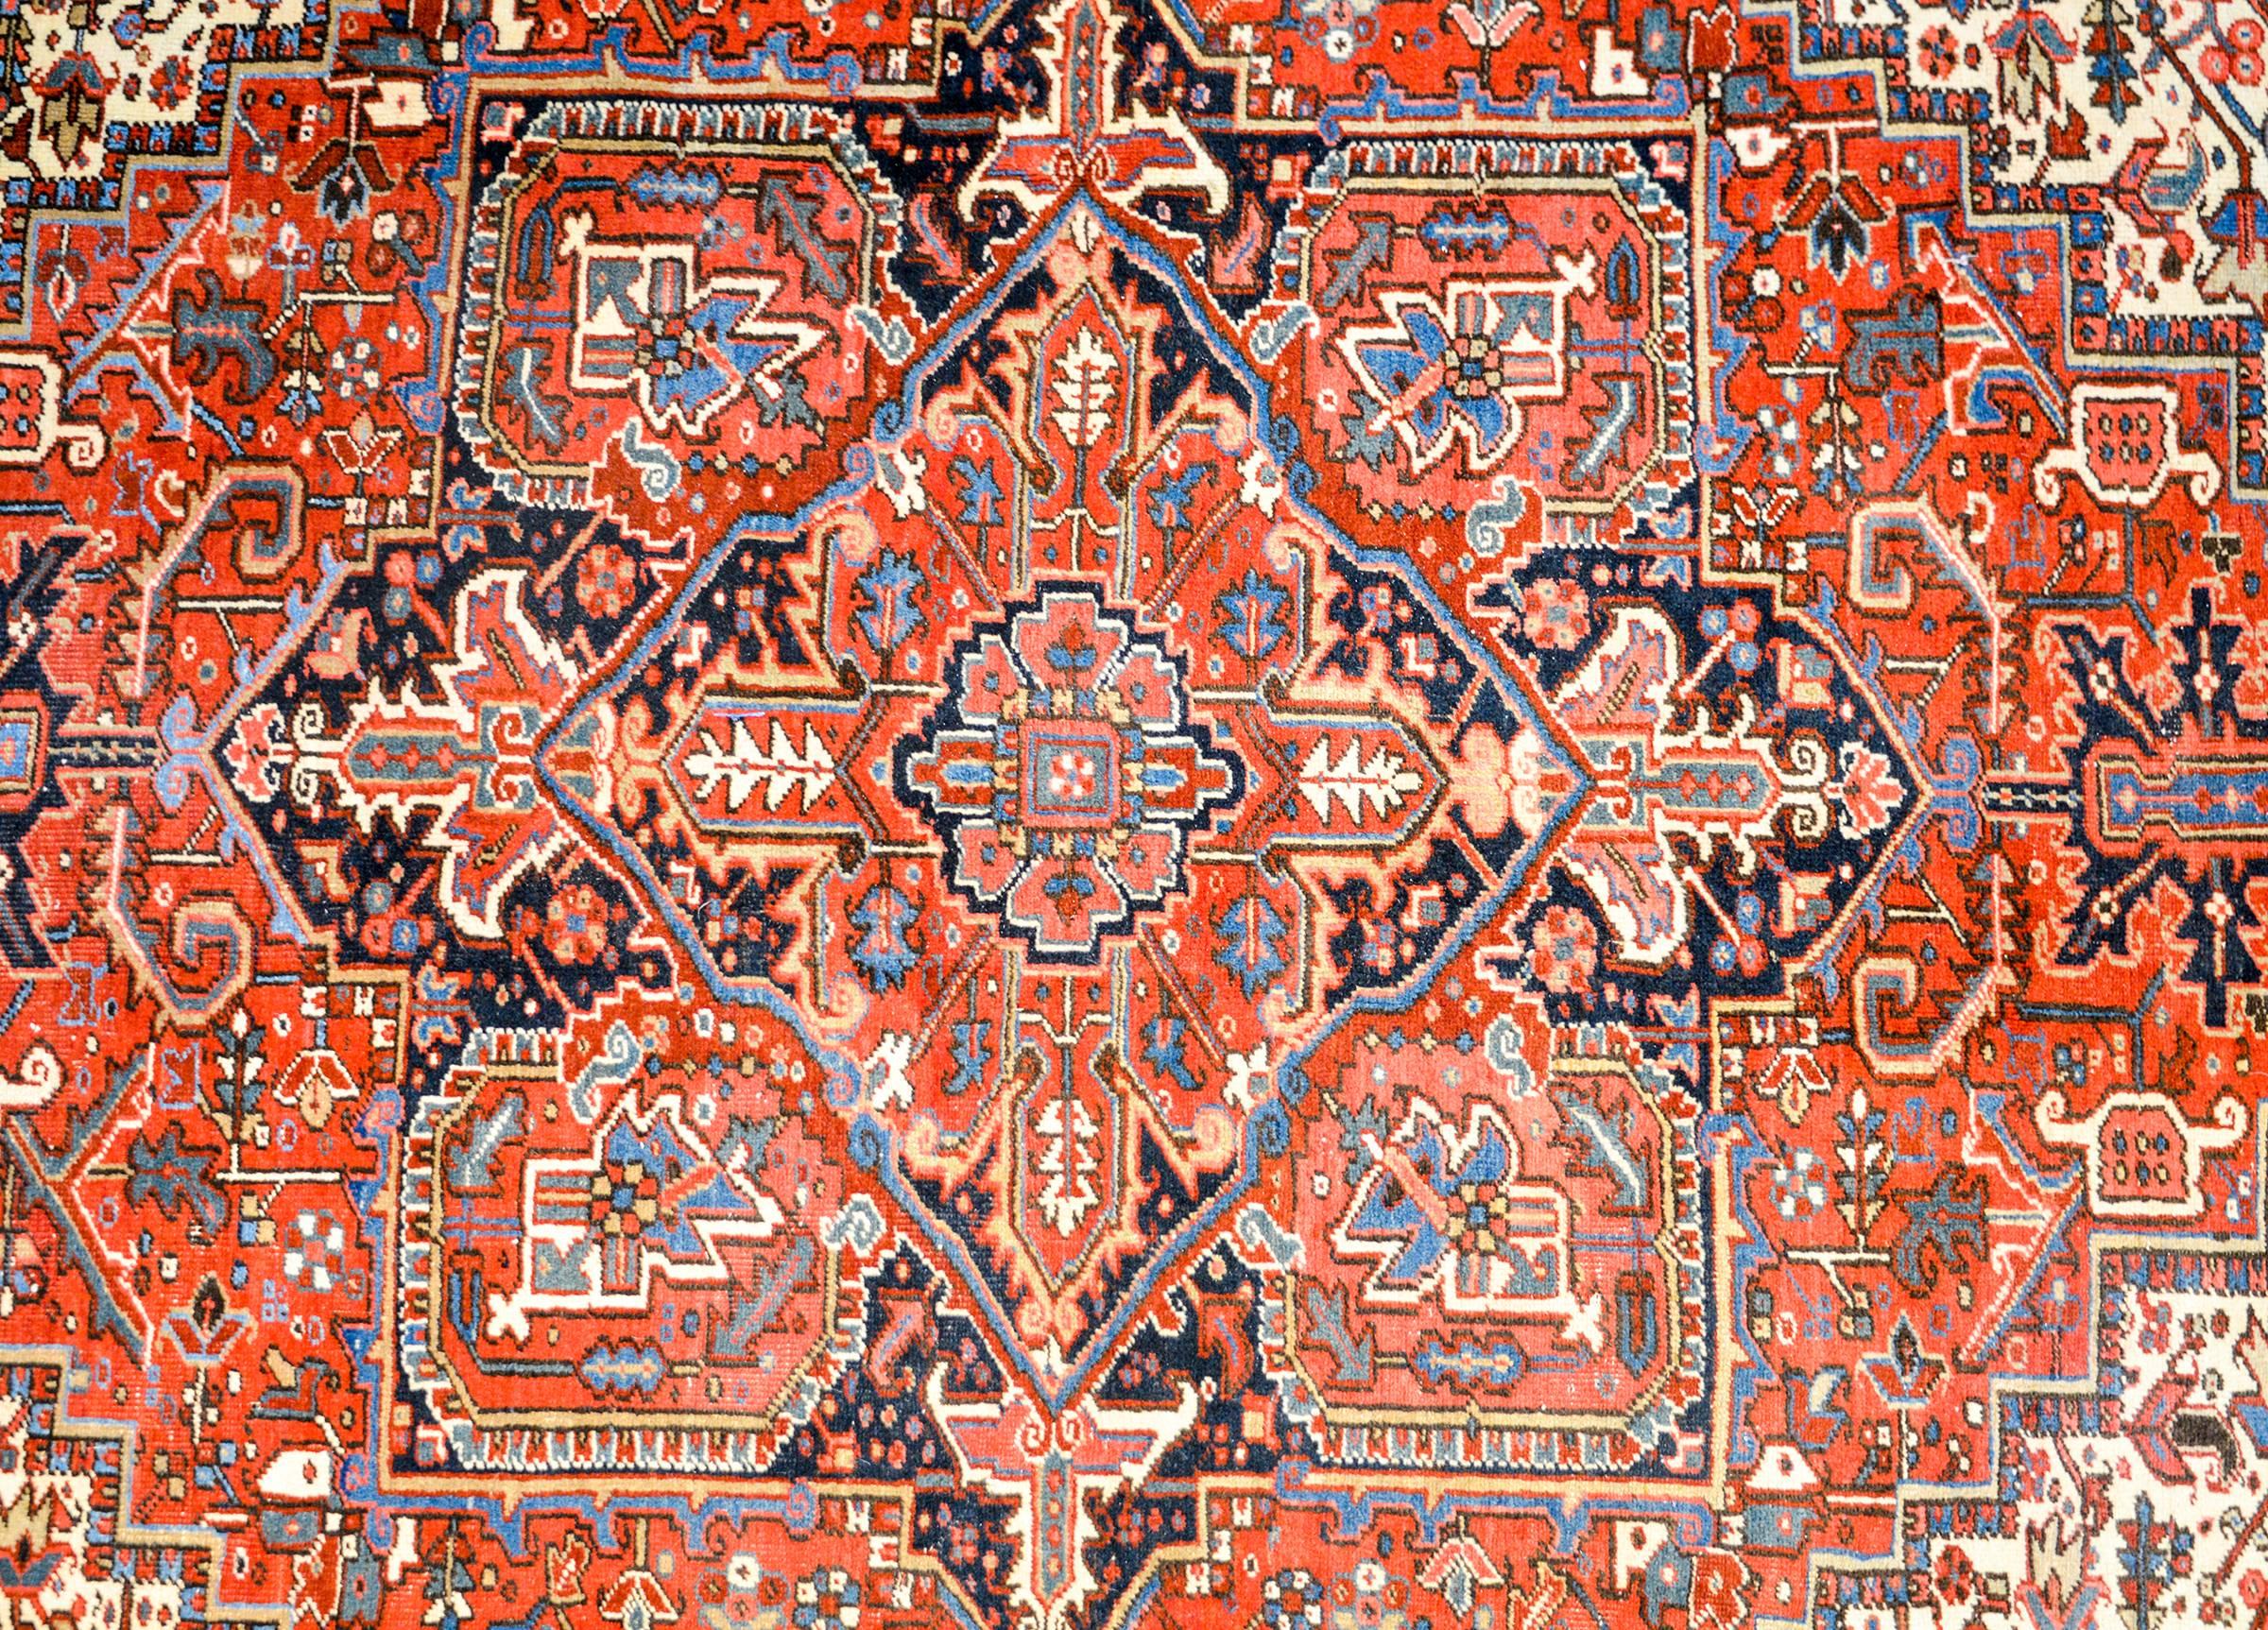 An amazing early 20th century Persian Heriz rug with a large central multi-lobed floral medallion with a crimson centre, surrounded by a deep indigo ring. The field is intensely woven with a complementary floral pattern. The border is comprised of a